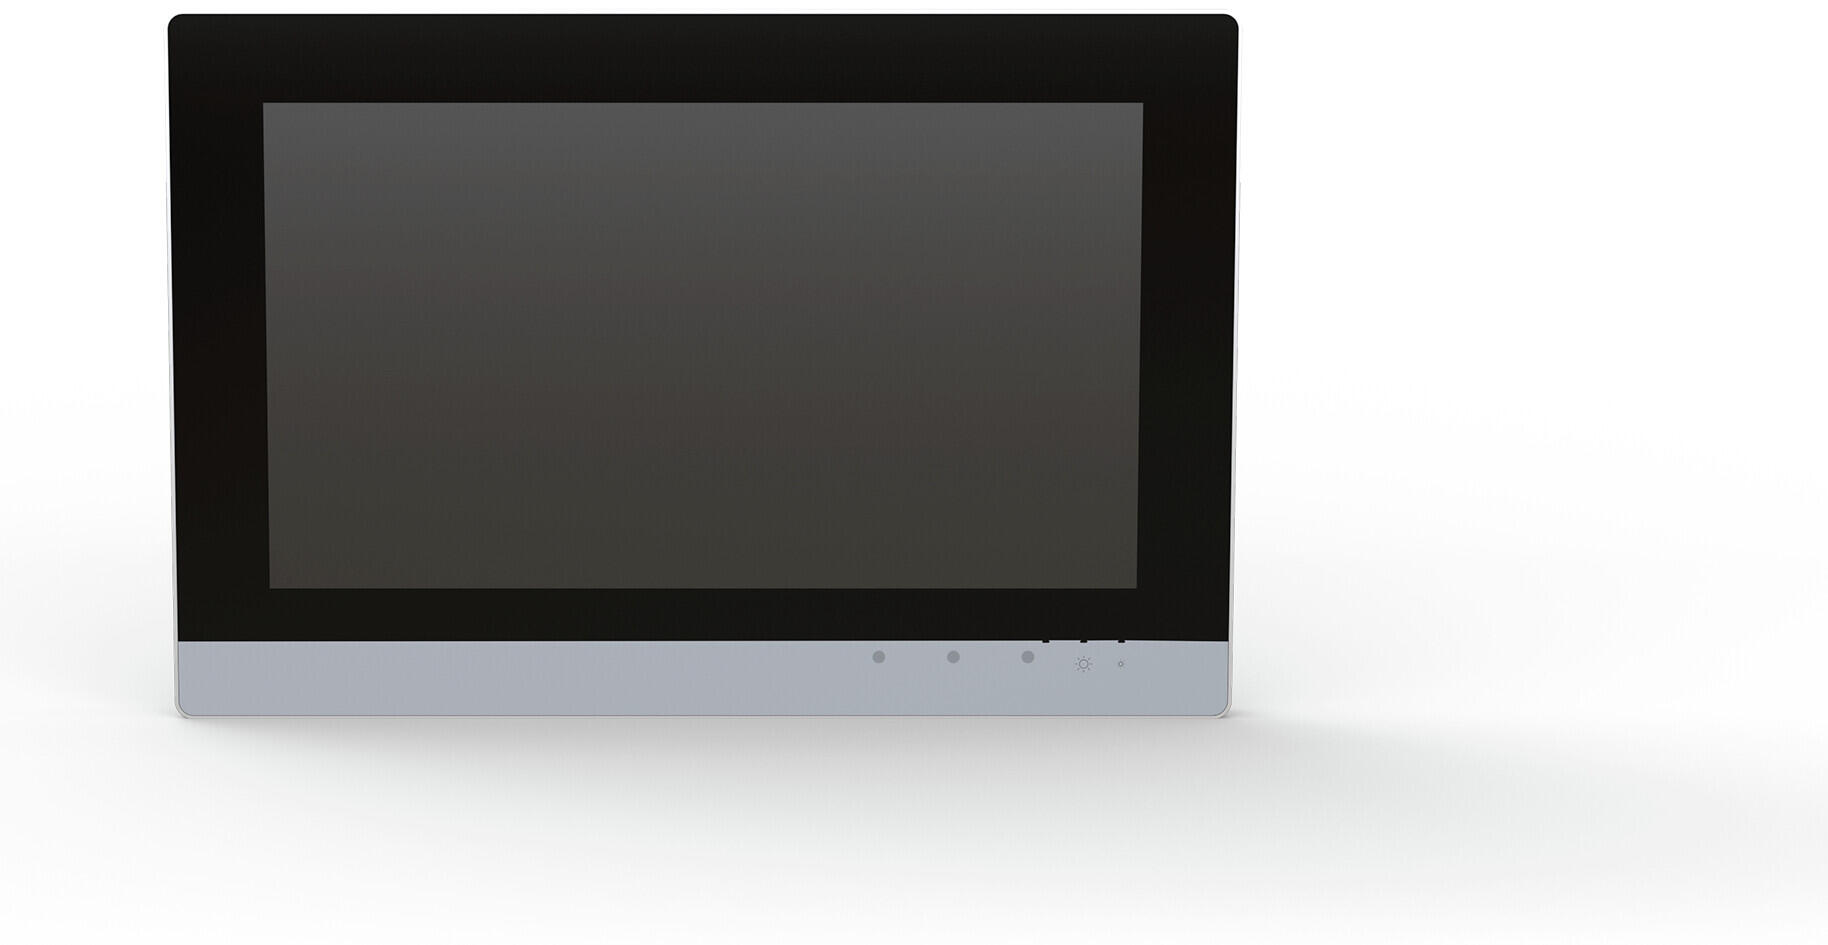 Touch Panel 600; 39.6 cm (15,6"); 1920 x 1080 pixels; 2 x ETHERNET, 2 x USB, CAN, DI/DO, RS-232/485, Audio; Control Panel